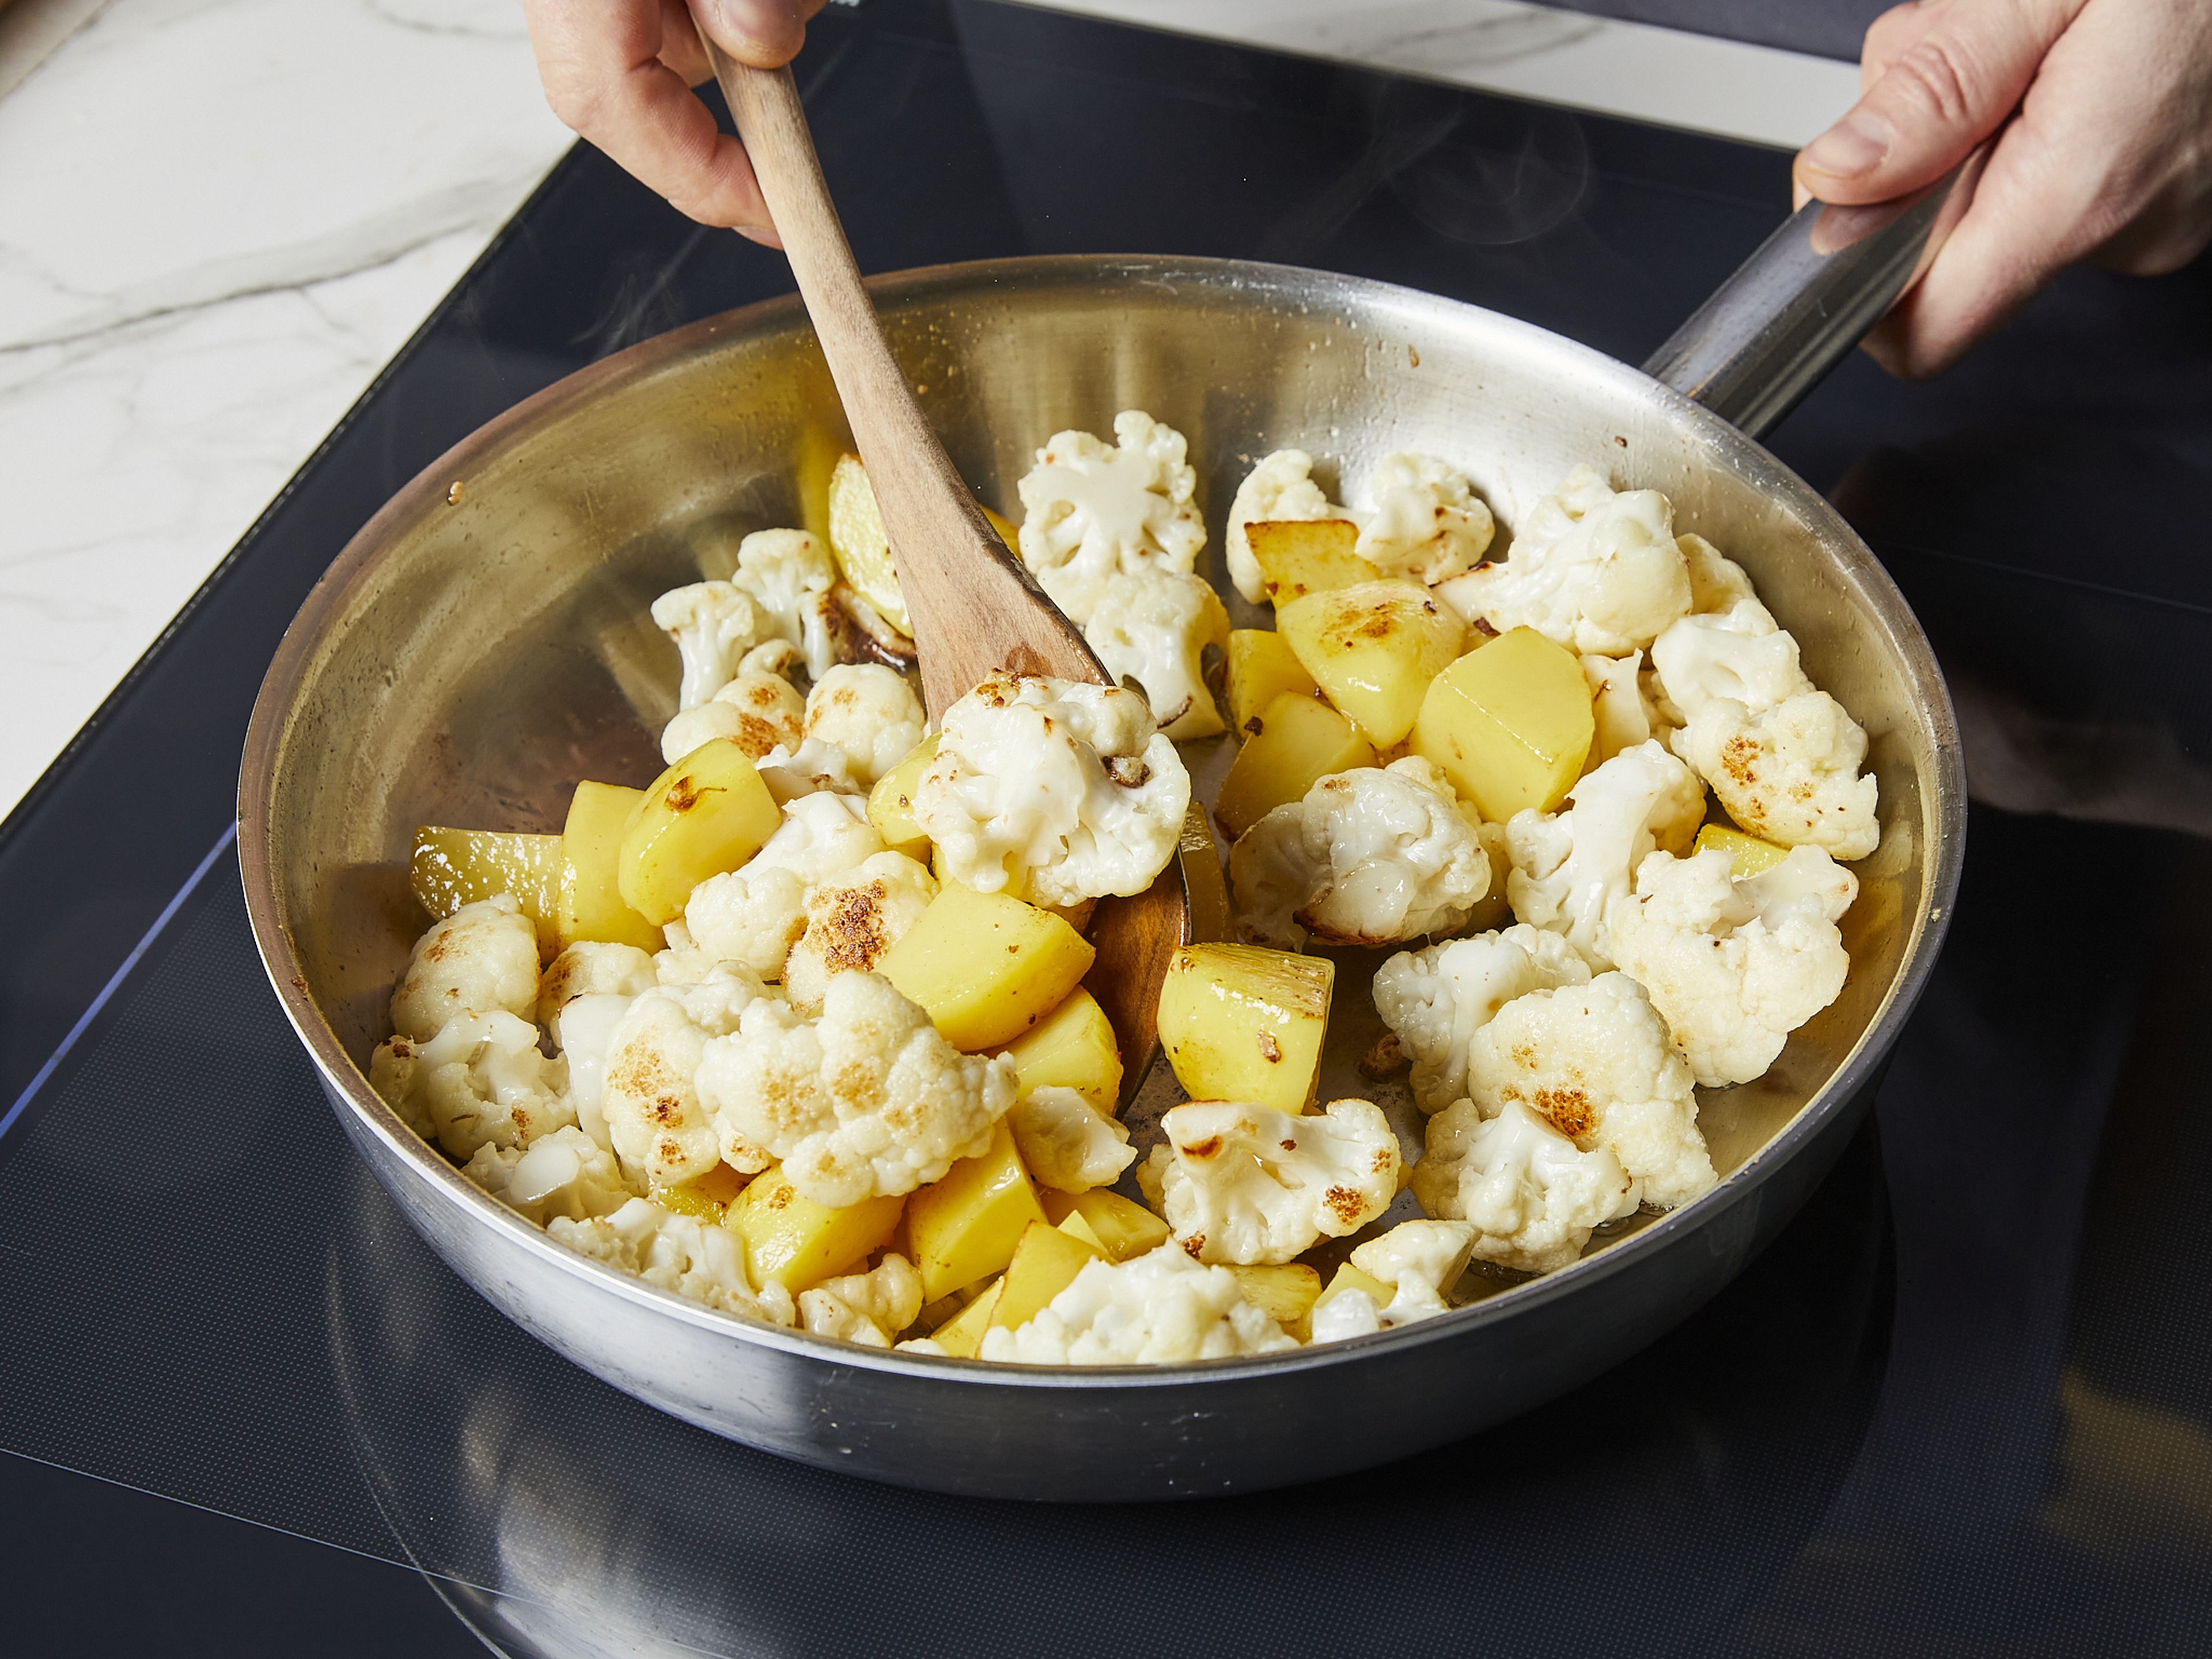 Heat half of the oil in a large pot or deep frying pan over medium heat. Add cauliflower florets and fry for approx. 2–3 min. Then add the potatoes. Fry over medium heat for approx. 7–8 min., until potatoes and cauliflower start browning. Remove from pan and set aside.